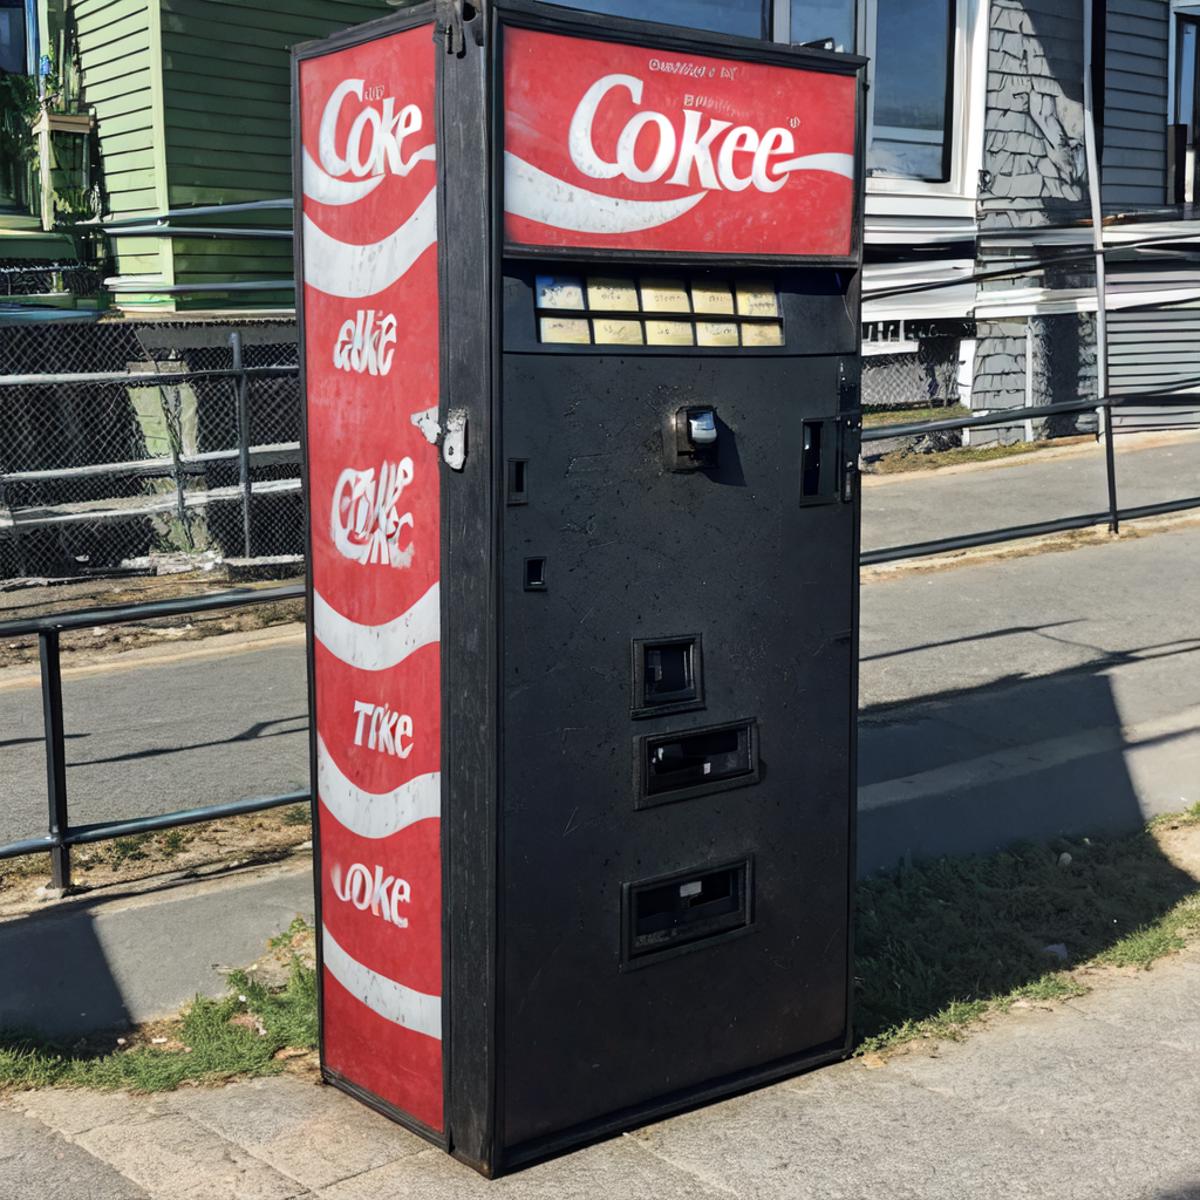 Capitol Hill's mystery soda machine image by uiouiouio